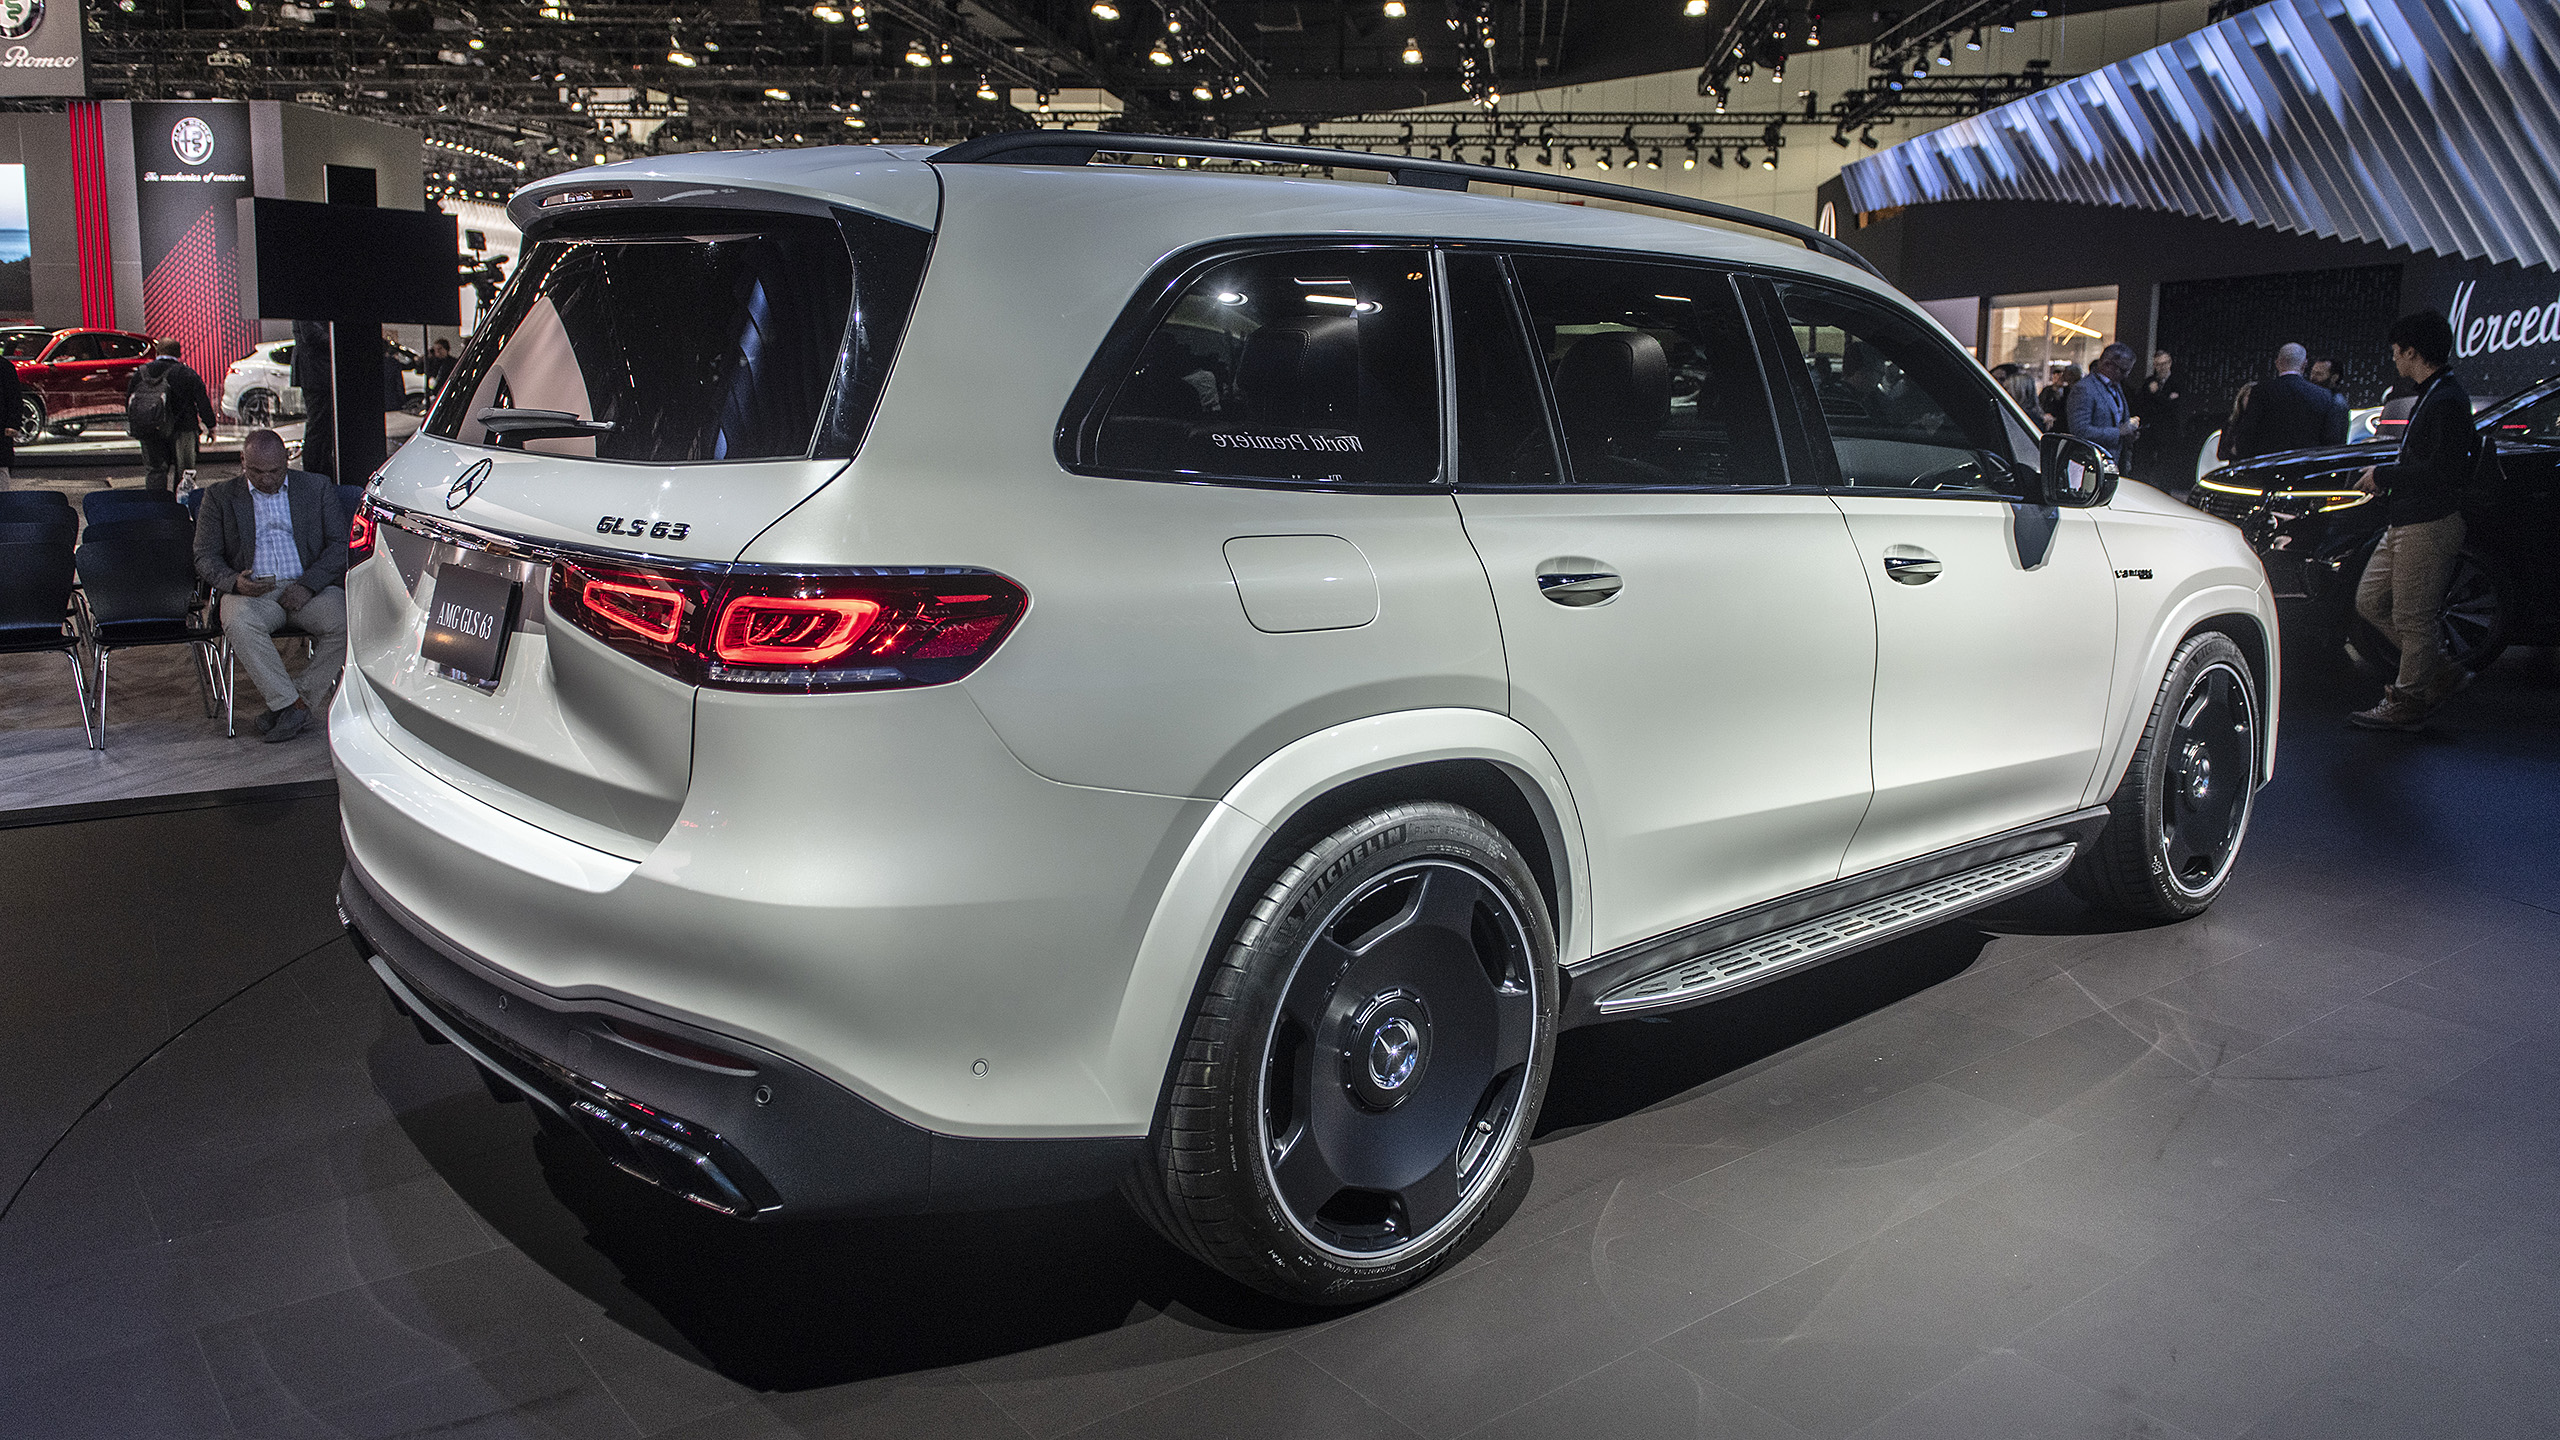 2021 Mercedes-AMG GLS 63 with 600 horsepower unveiled at L.A. Auto Show ...